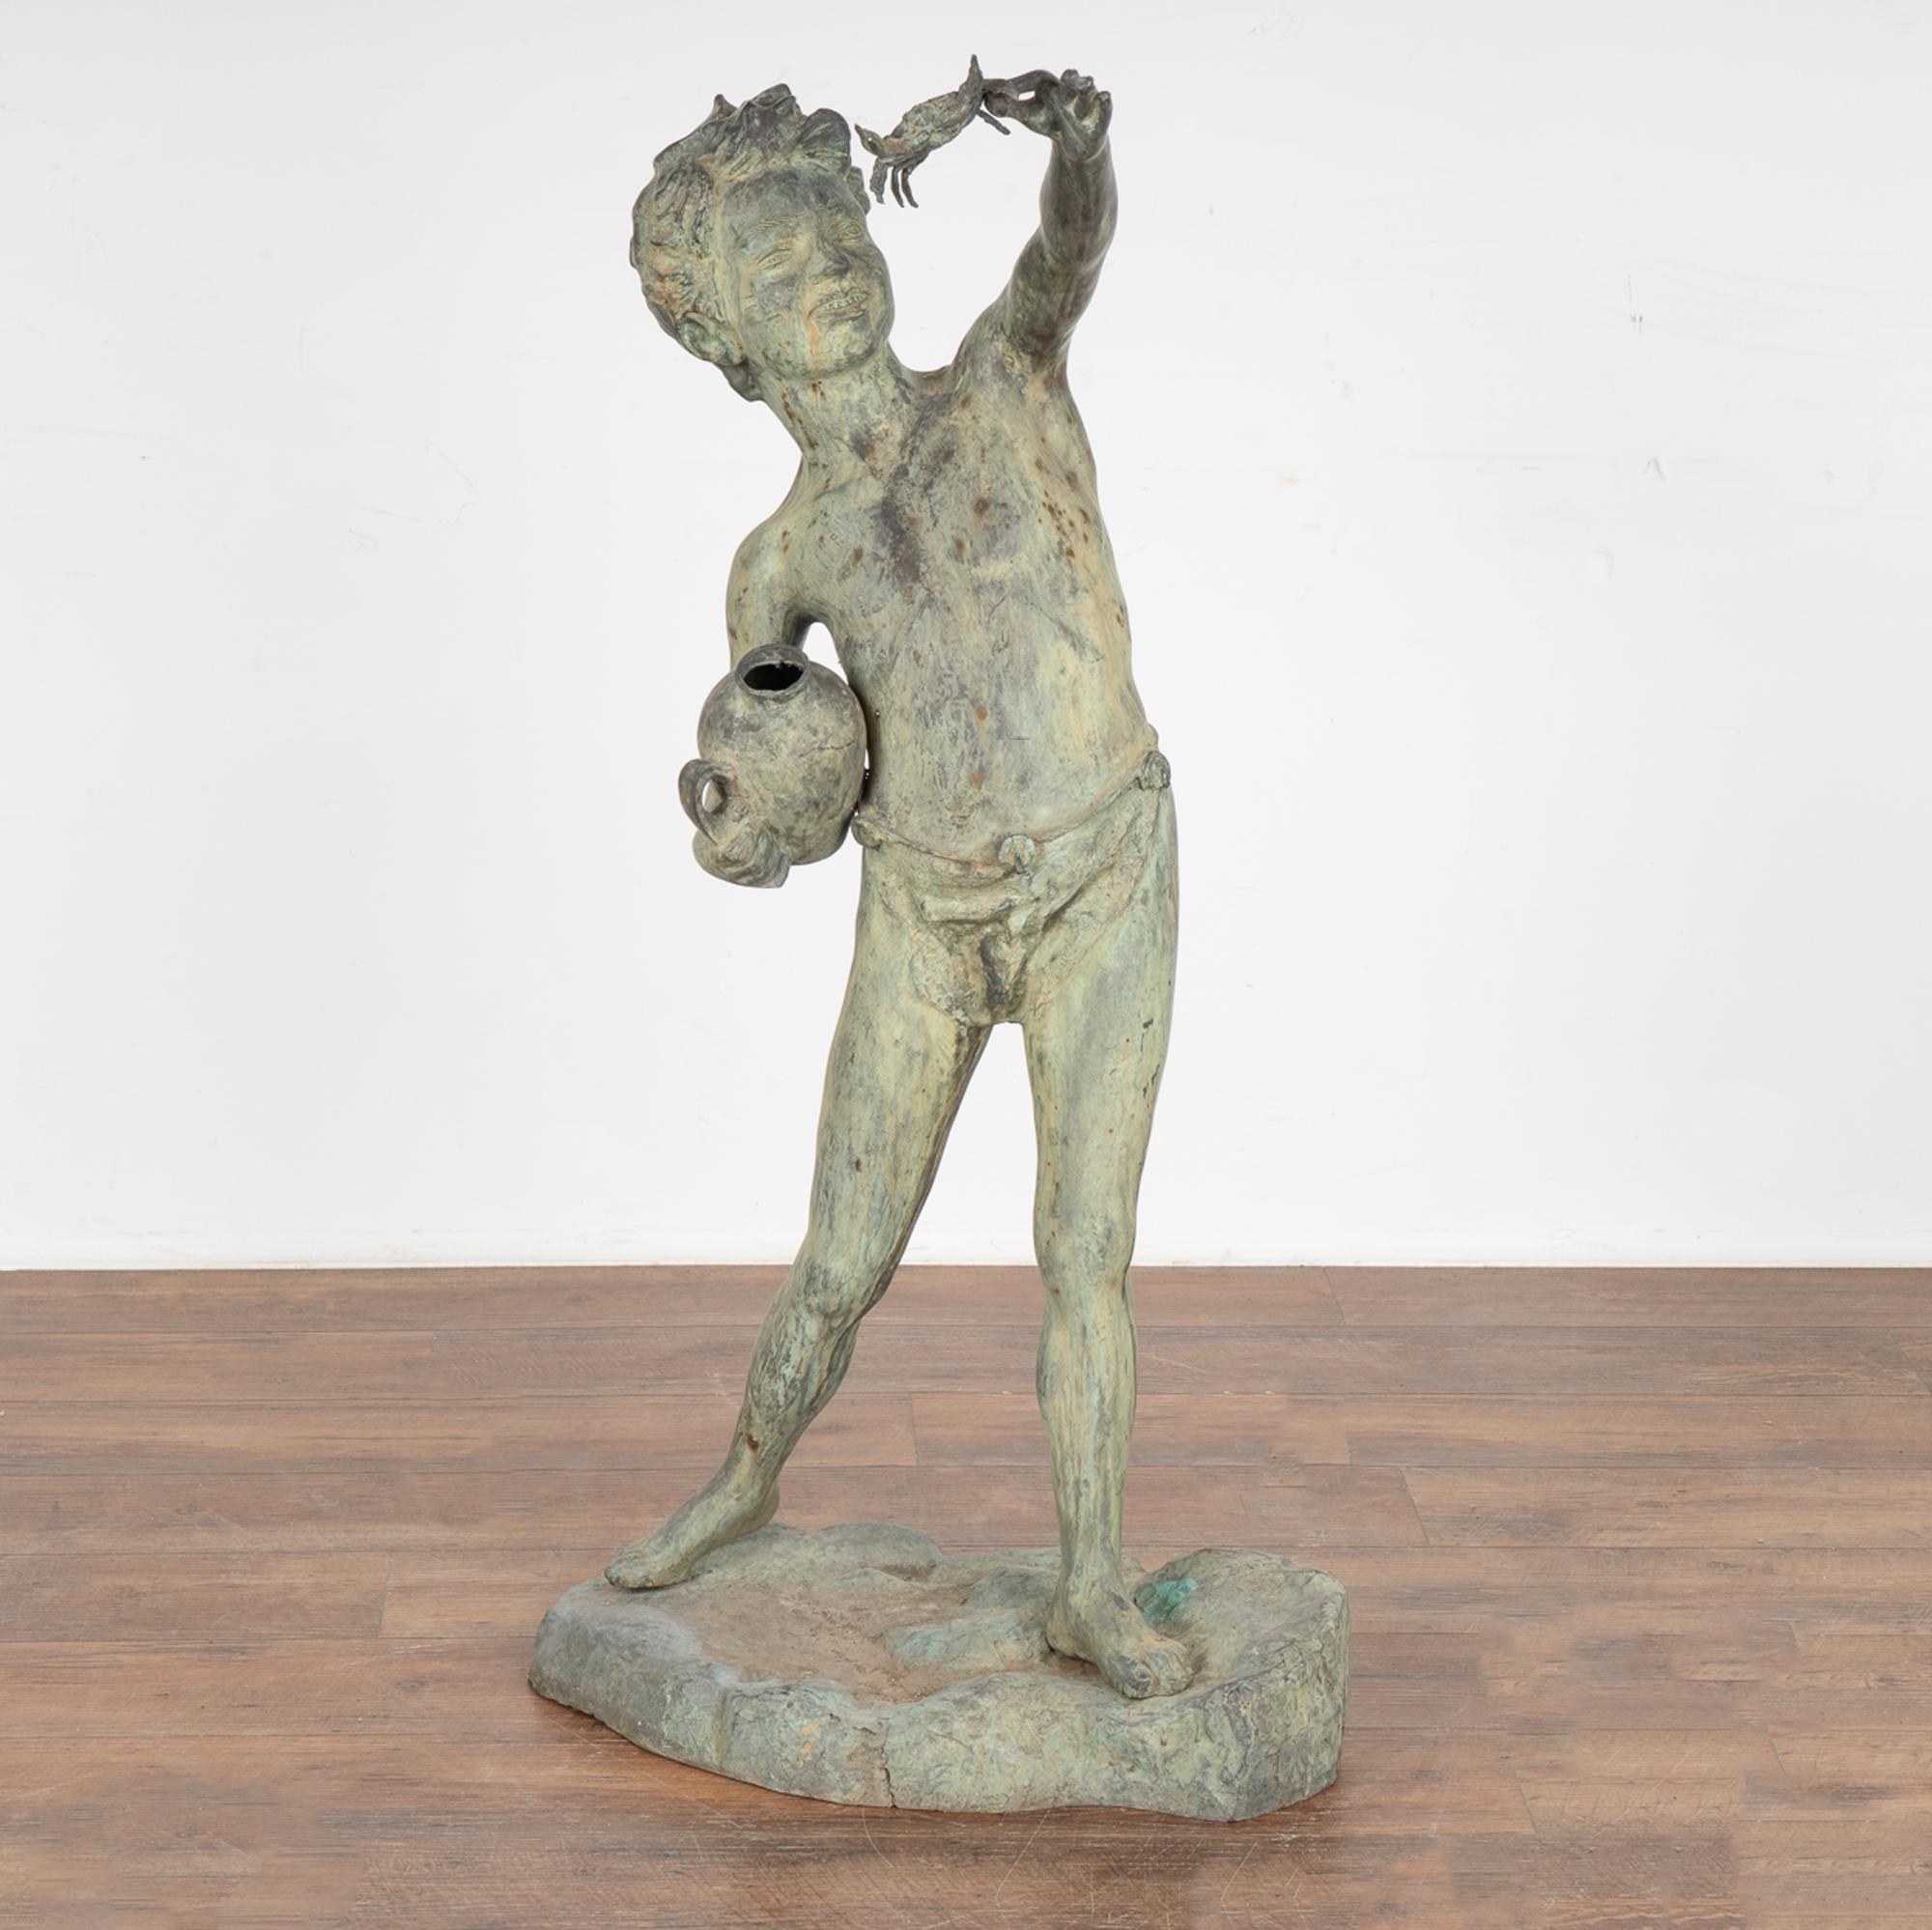 Bronze garden figure of standing young boy with a crab in one hand and a jar in the other. 
Verdigris aged patina from years outdoors.
Sold in original used condition. Any nicks, scratches, dings, cracks are refective of age and use and do not